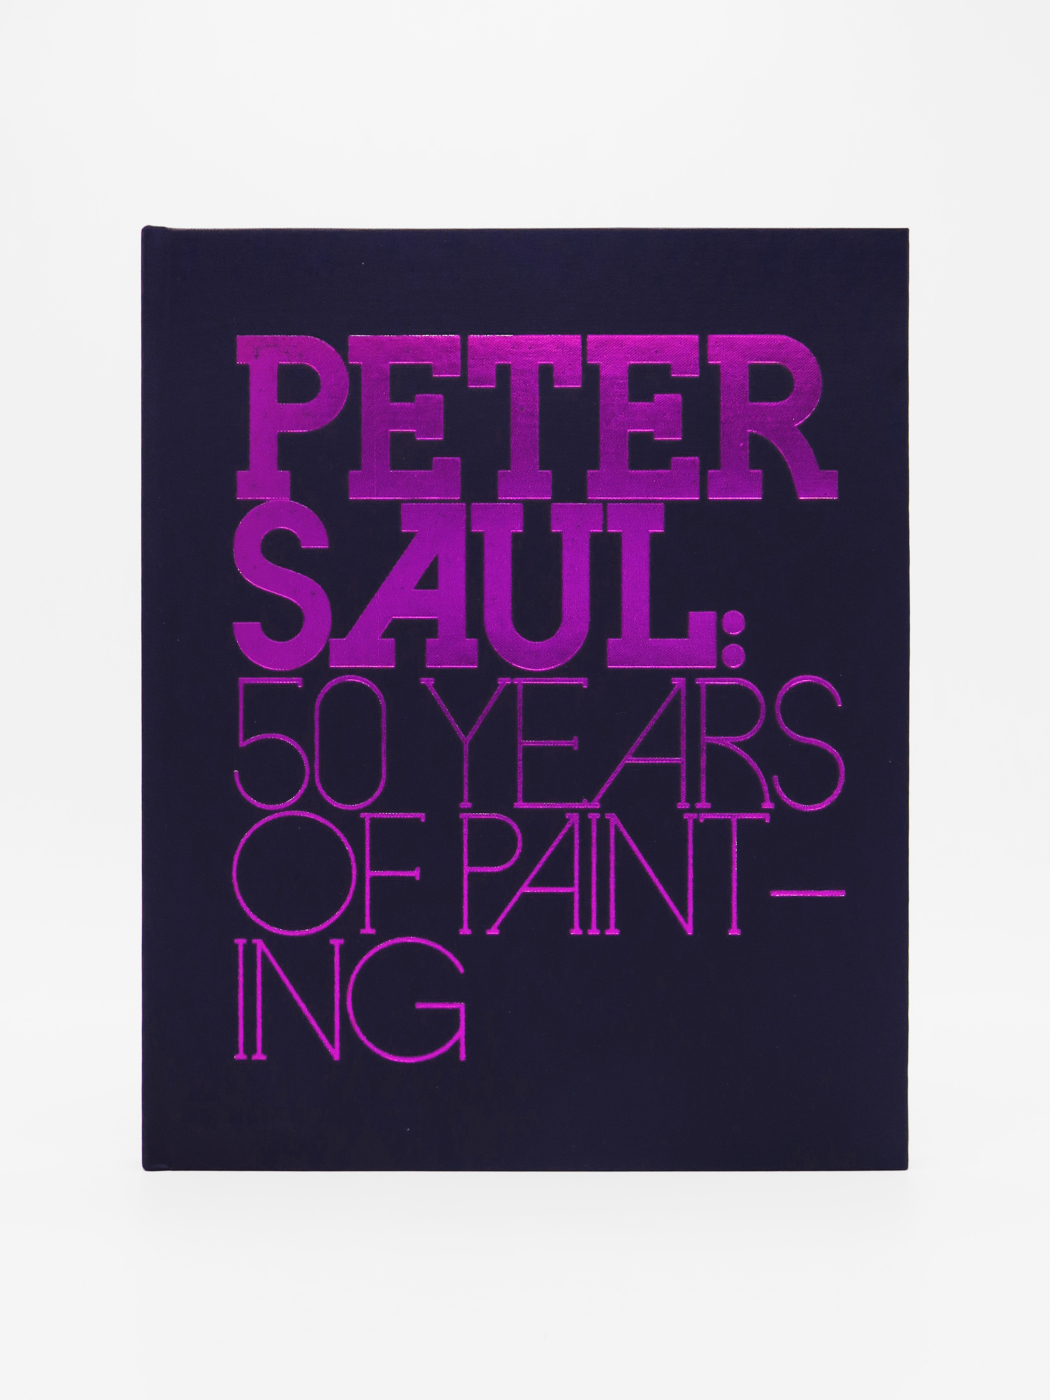 Peter Saul, 50 Years of Painting